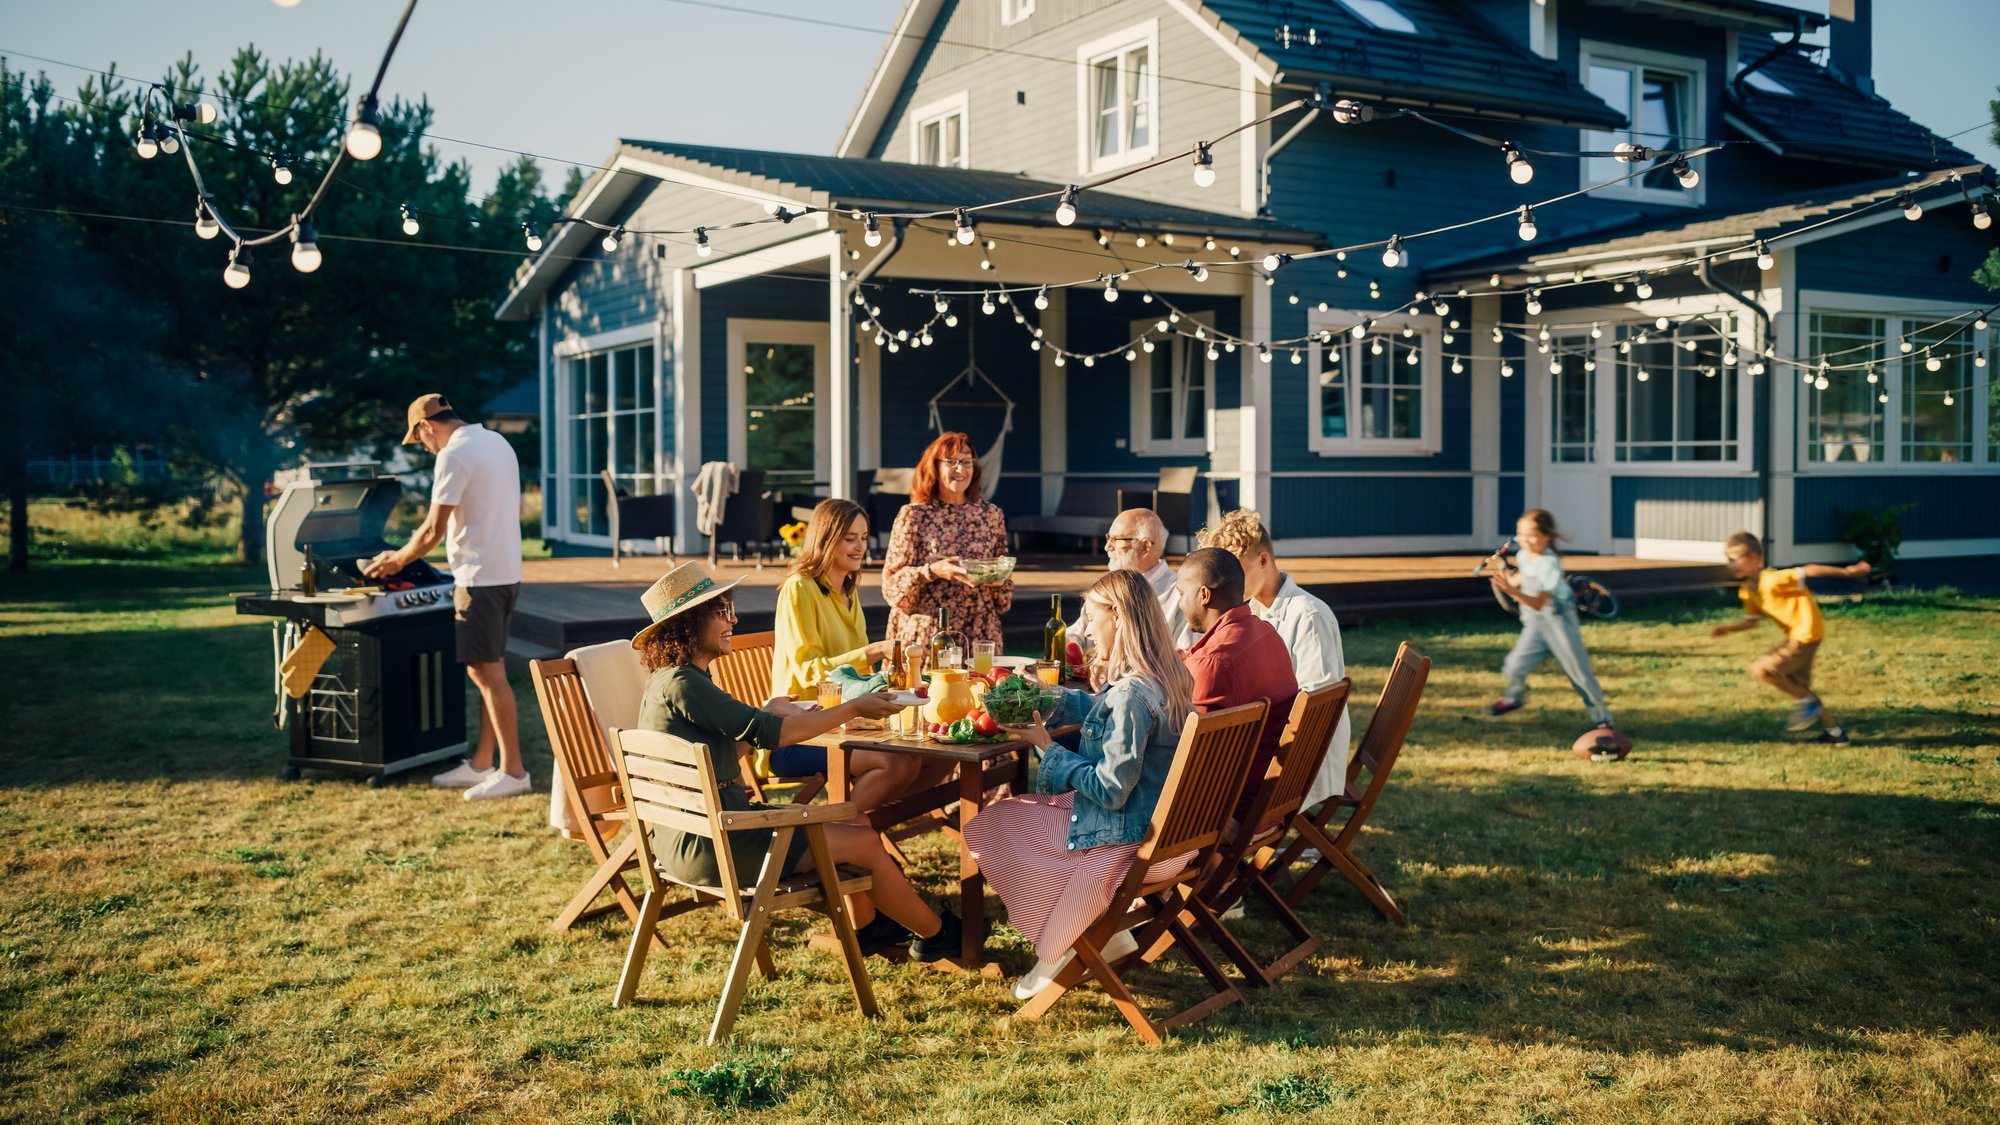 Family gathered around a table in a backyard with lights strung above them and blue exterior of home behind.